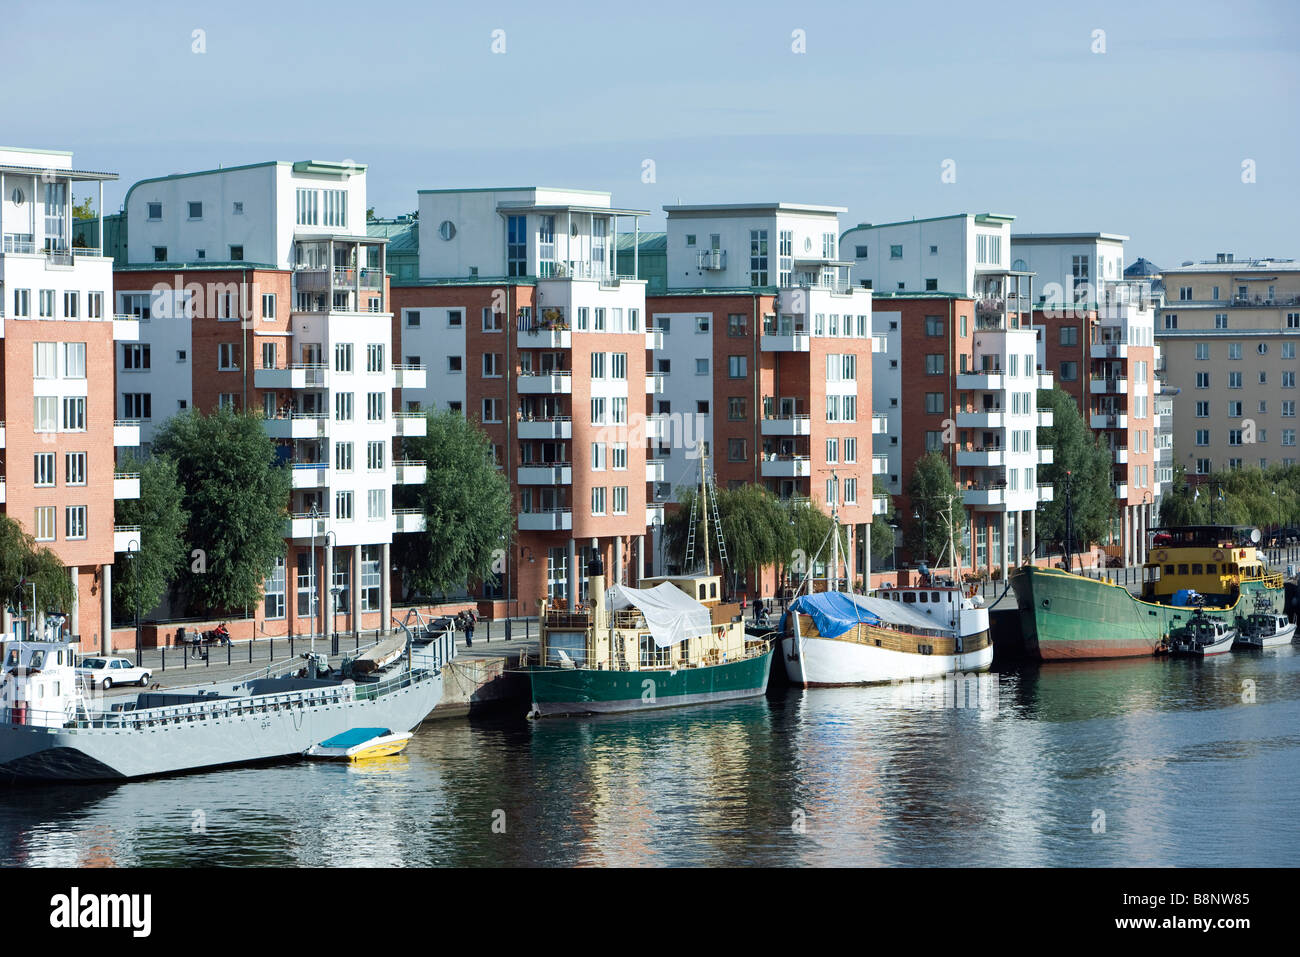 Sweden, Sodermanland, Stockholm, waterfront apartment buildings Stock Photo